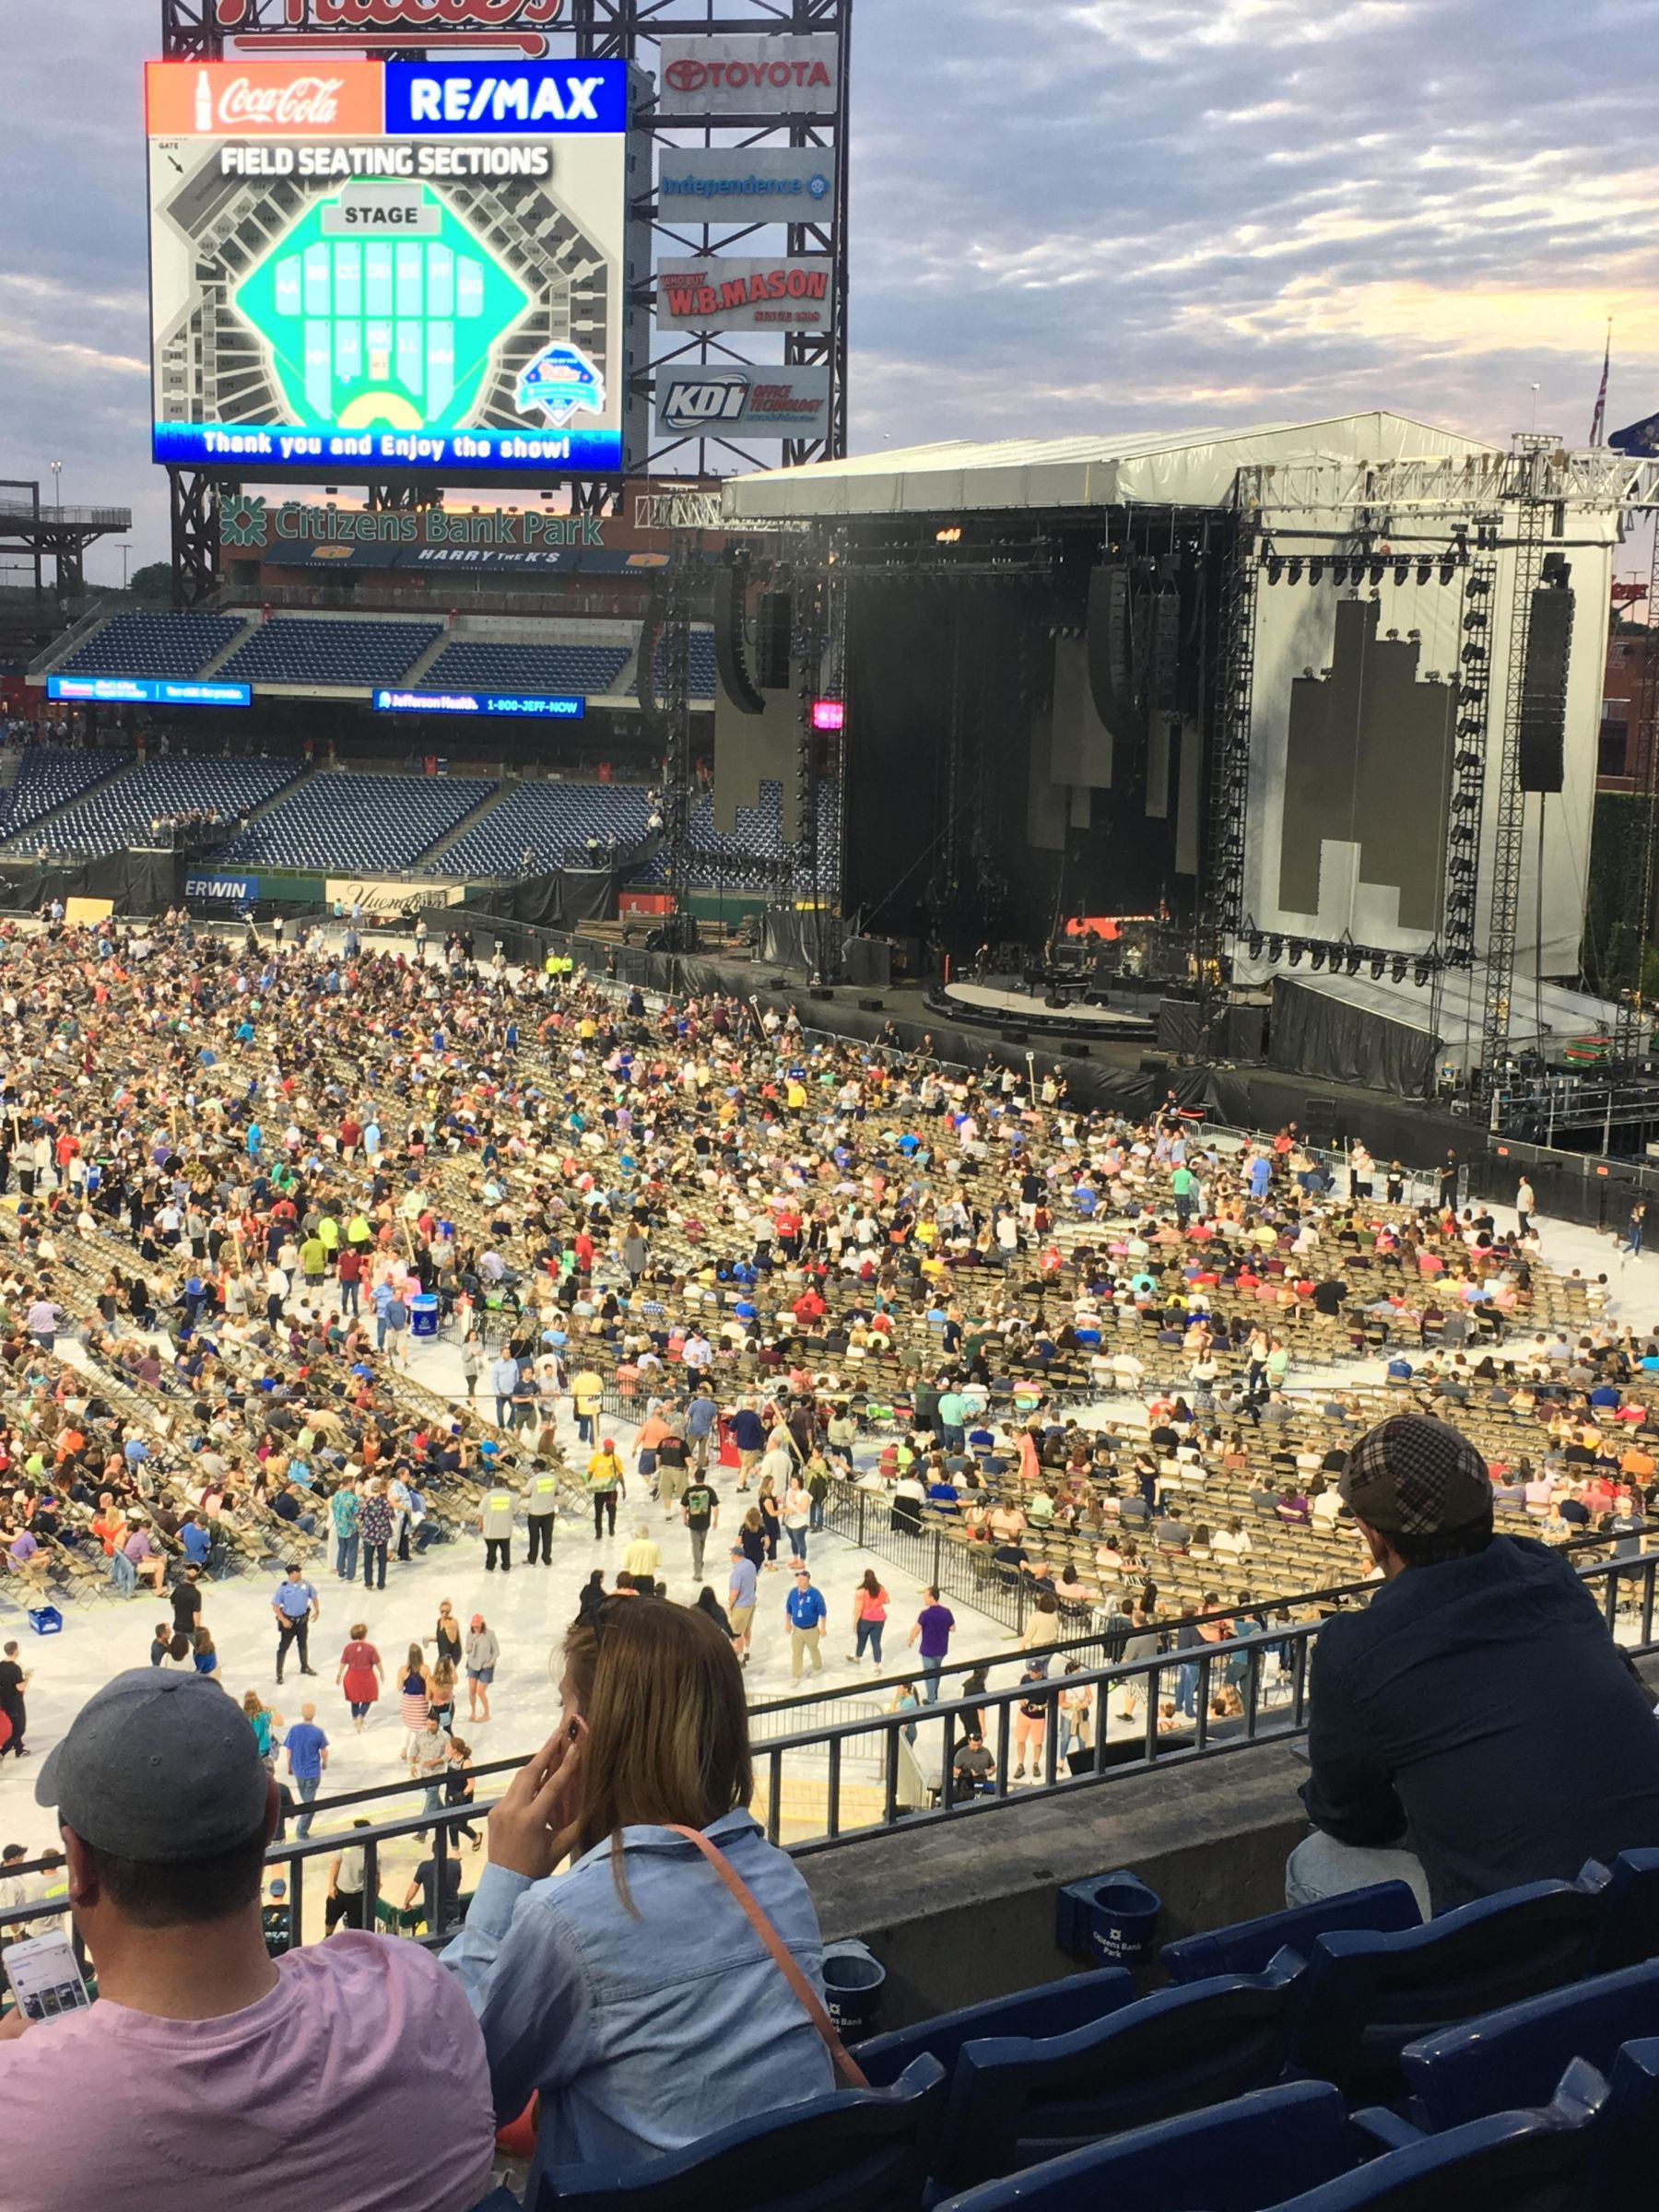 section 209, row 4 seat view  for concert - citizens bank park